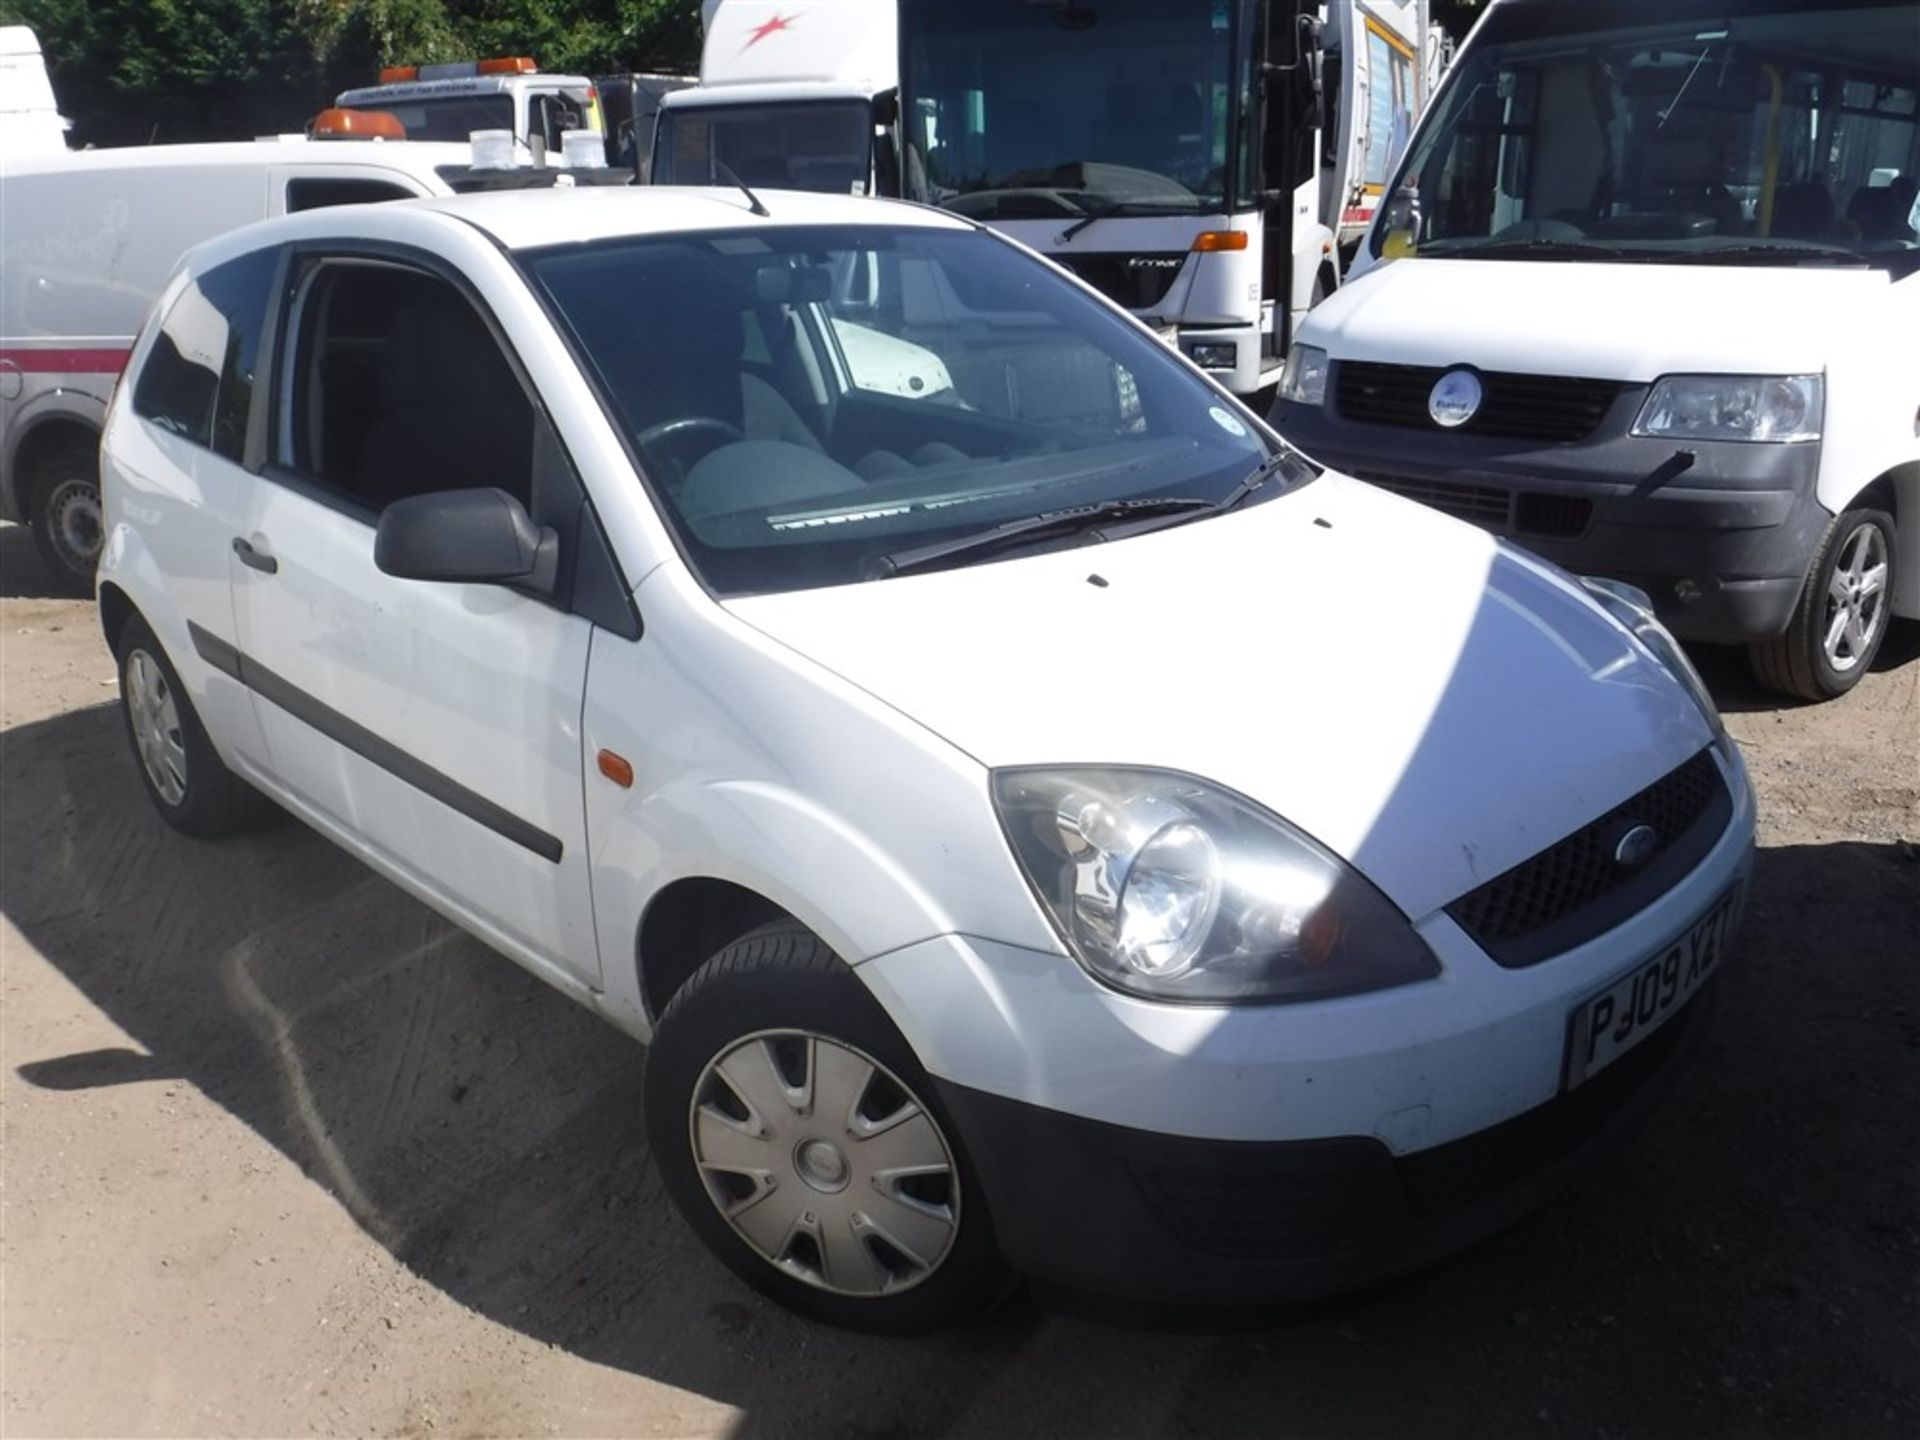 09 reg FORD FIESTA TDCI VAN (DIRECT COUNCIL) 1ST REG 06/09, 88938M, V5 HERE, 1 OWNER FROM NEW [+